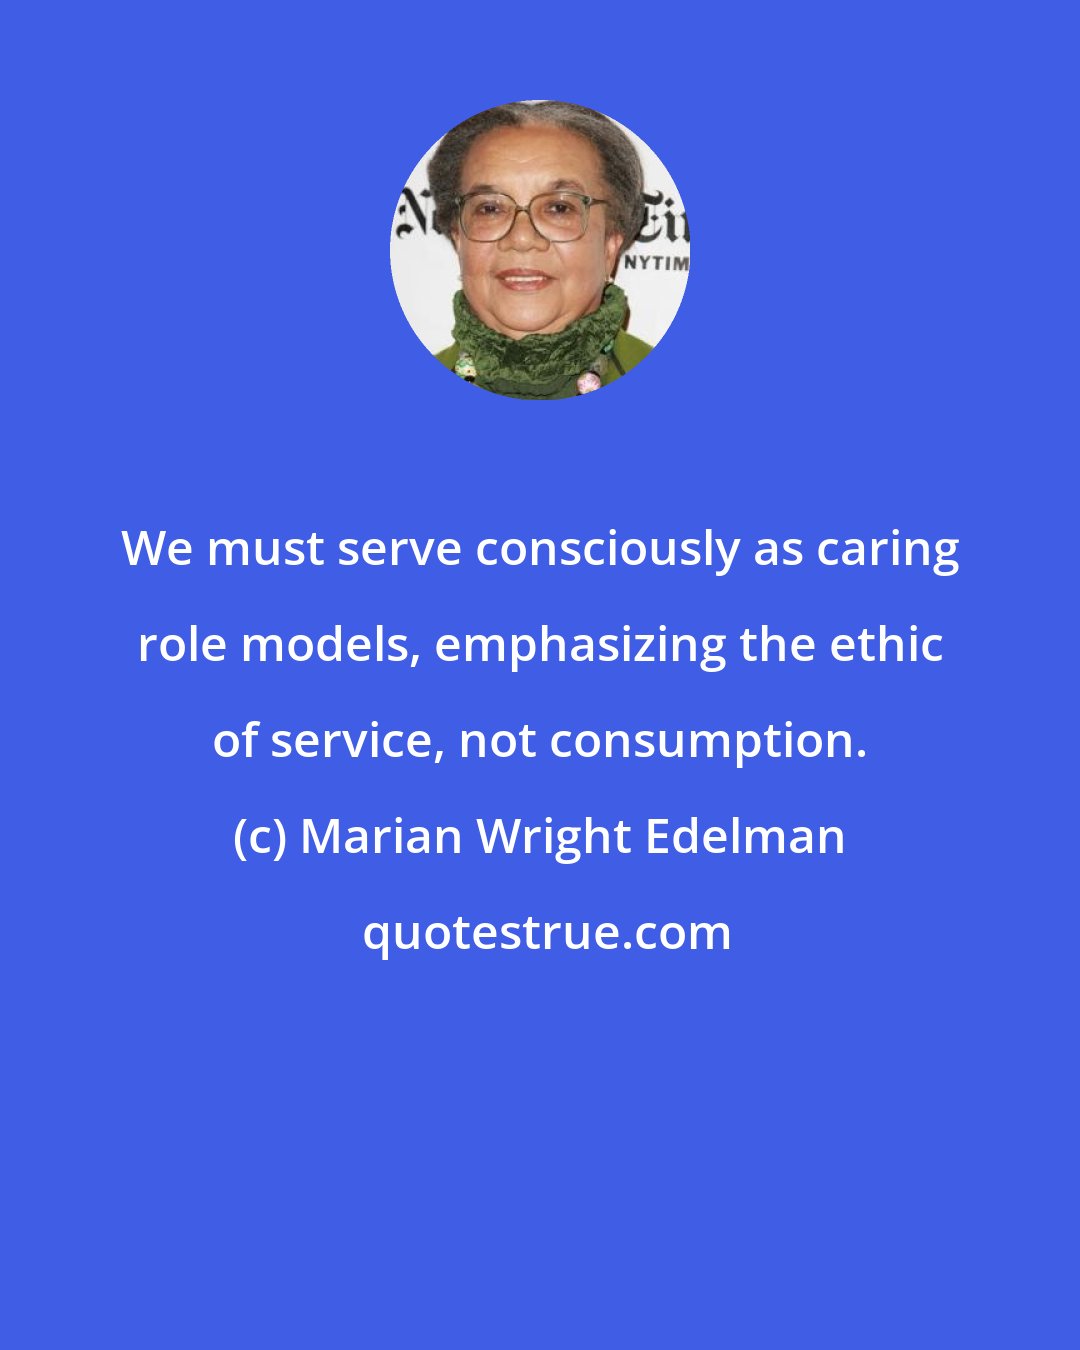 Marian Wright Edelman: We must serve consciously as caring role models, emphasizing the ethic of service, not consumption.